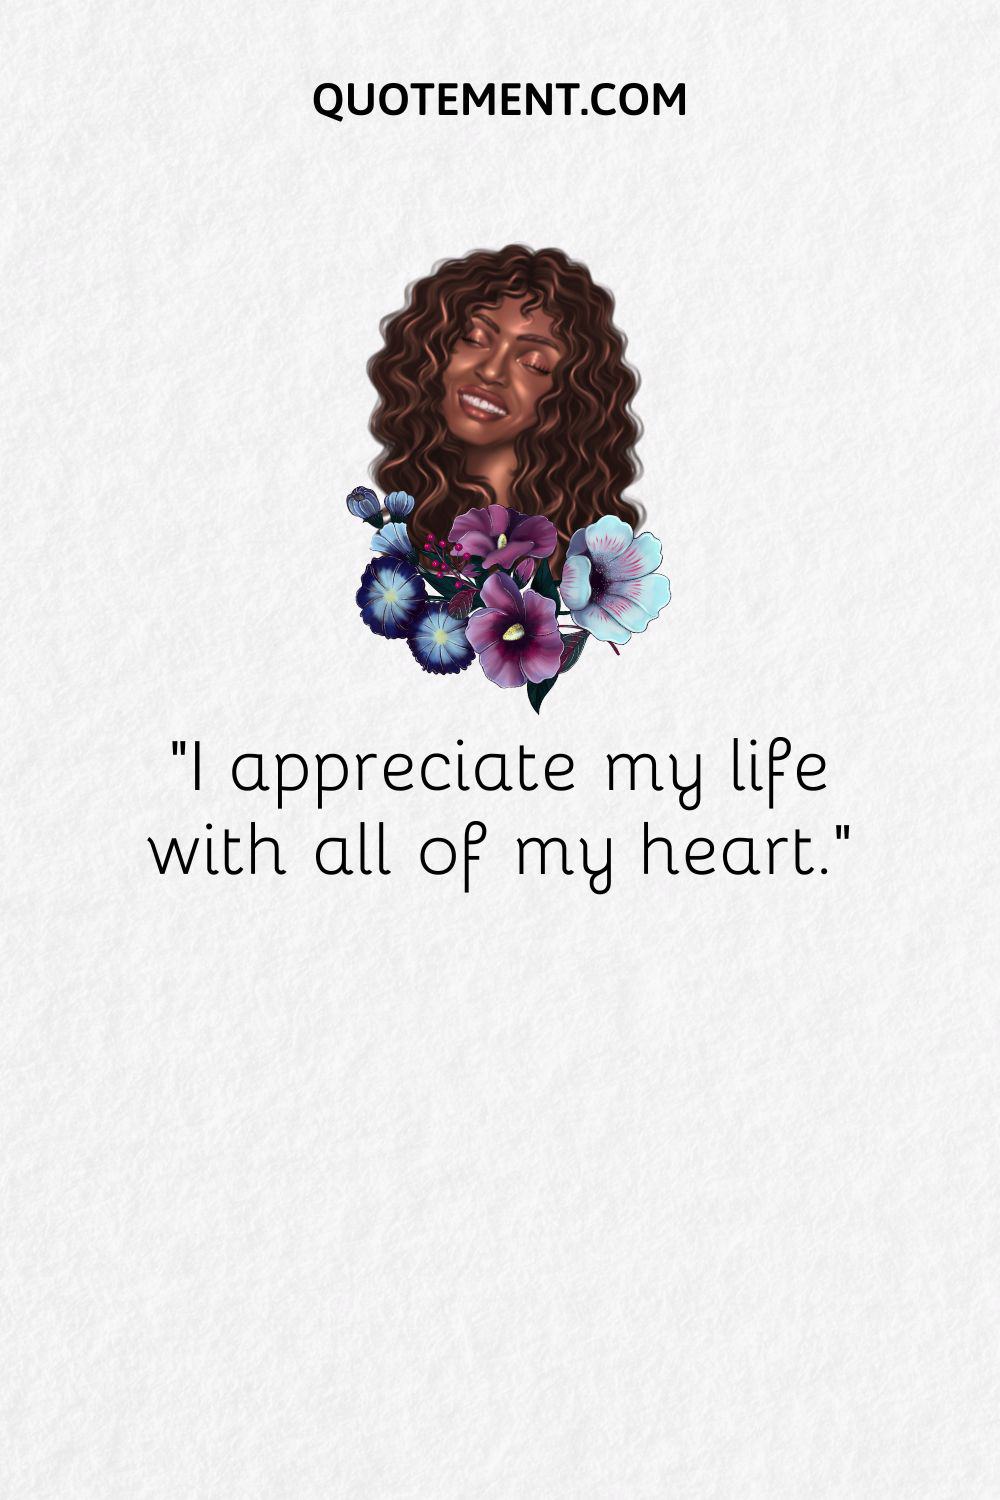 image of a curly-haired woman and flowers representing best self-love affirmation